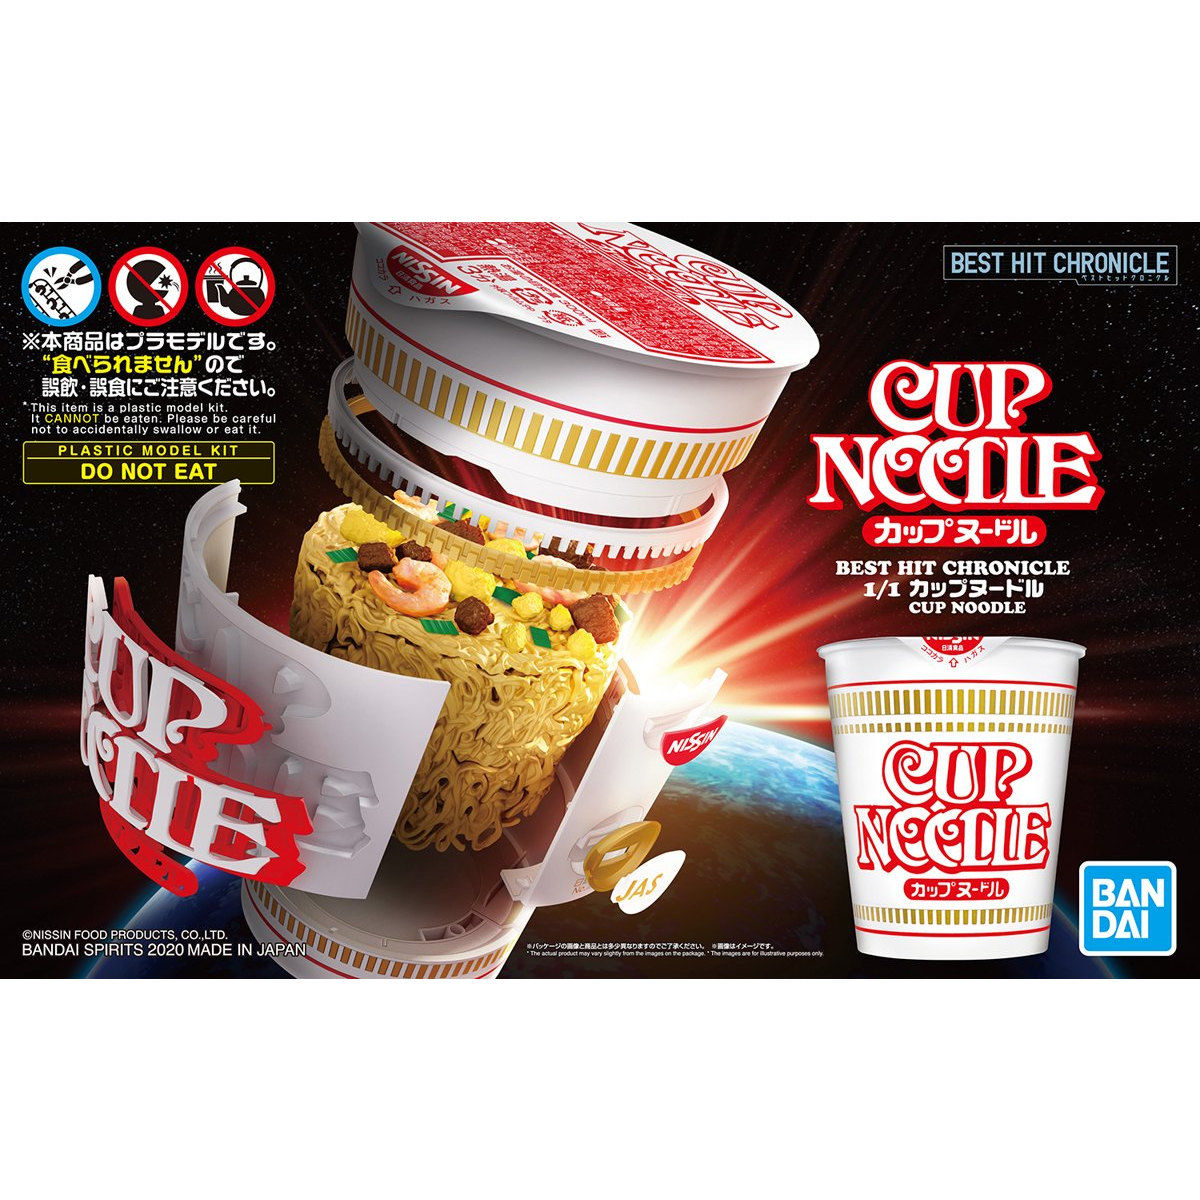 Bandai Hobby 1/1 Spirits Best Hit Chronicle Cup Noodle for sale online